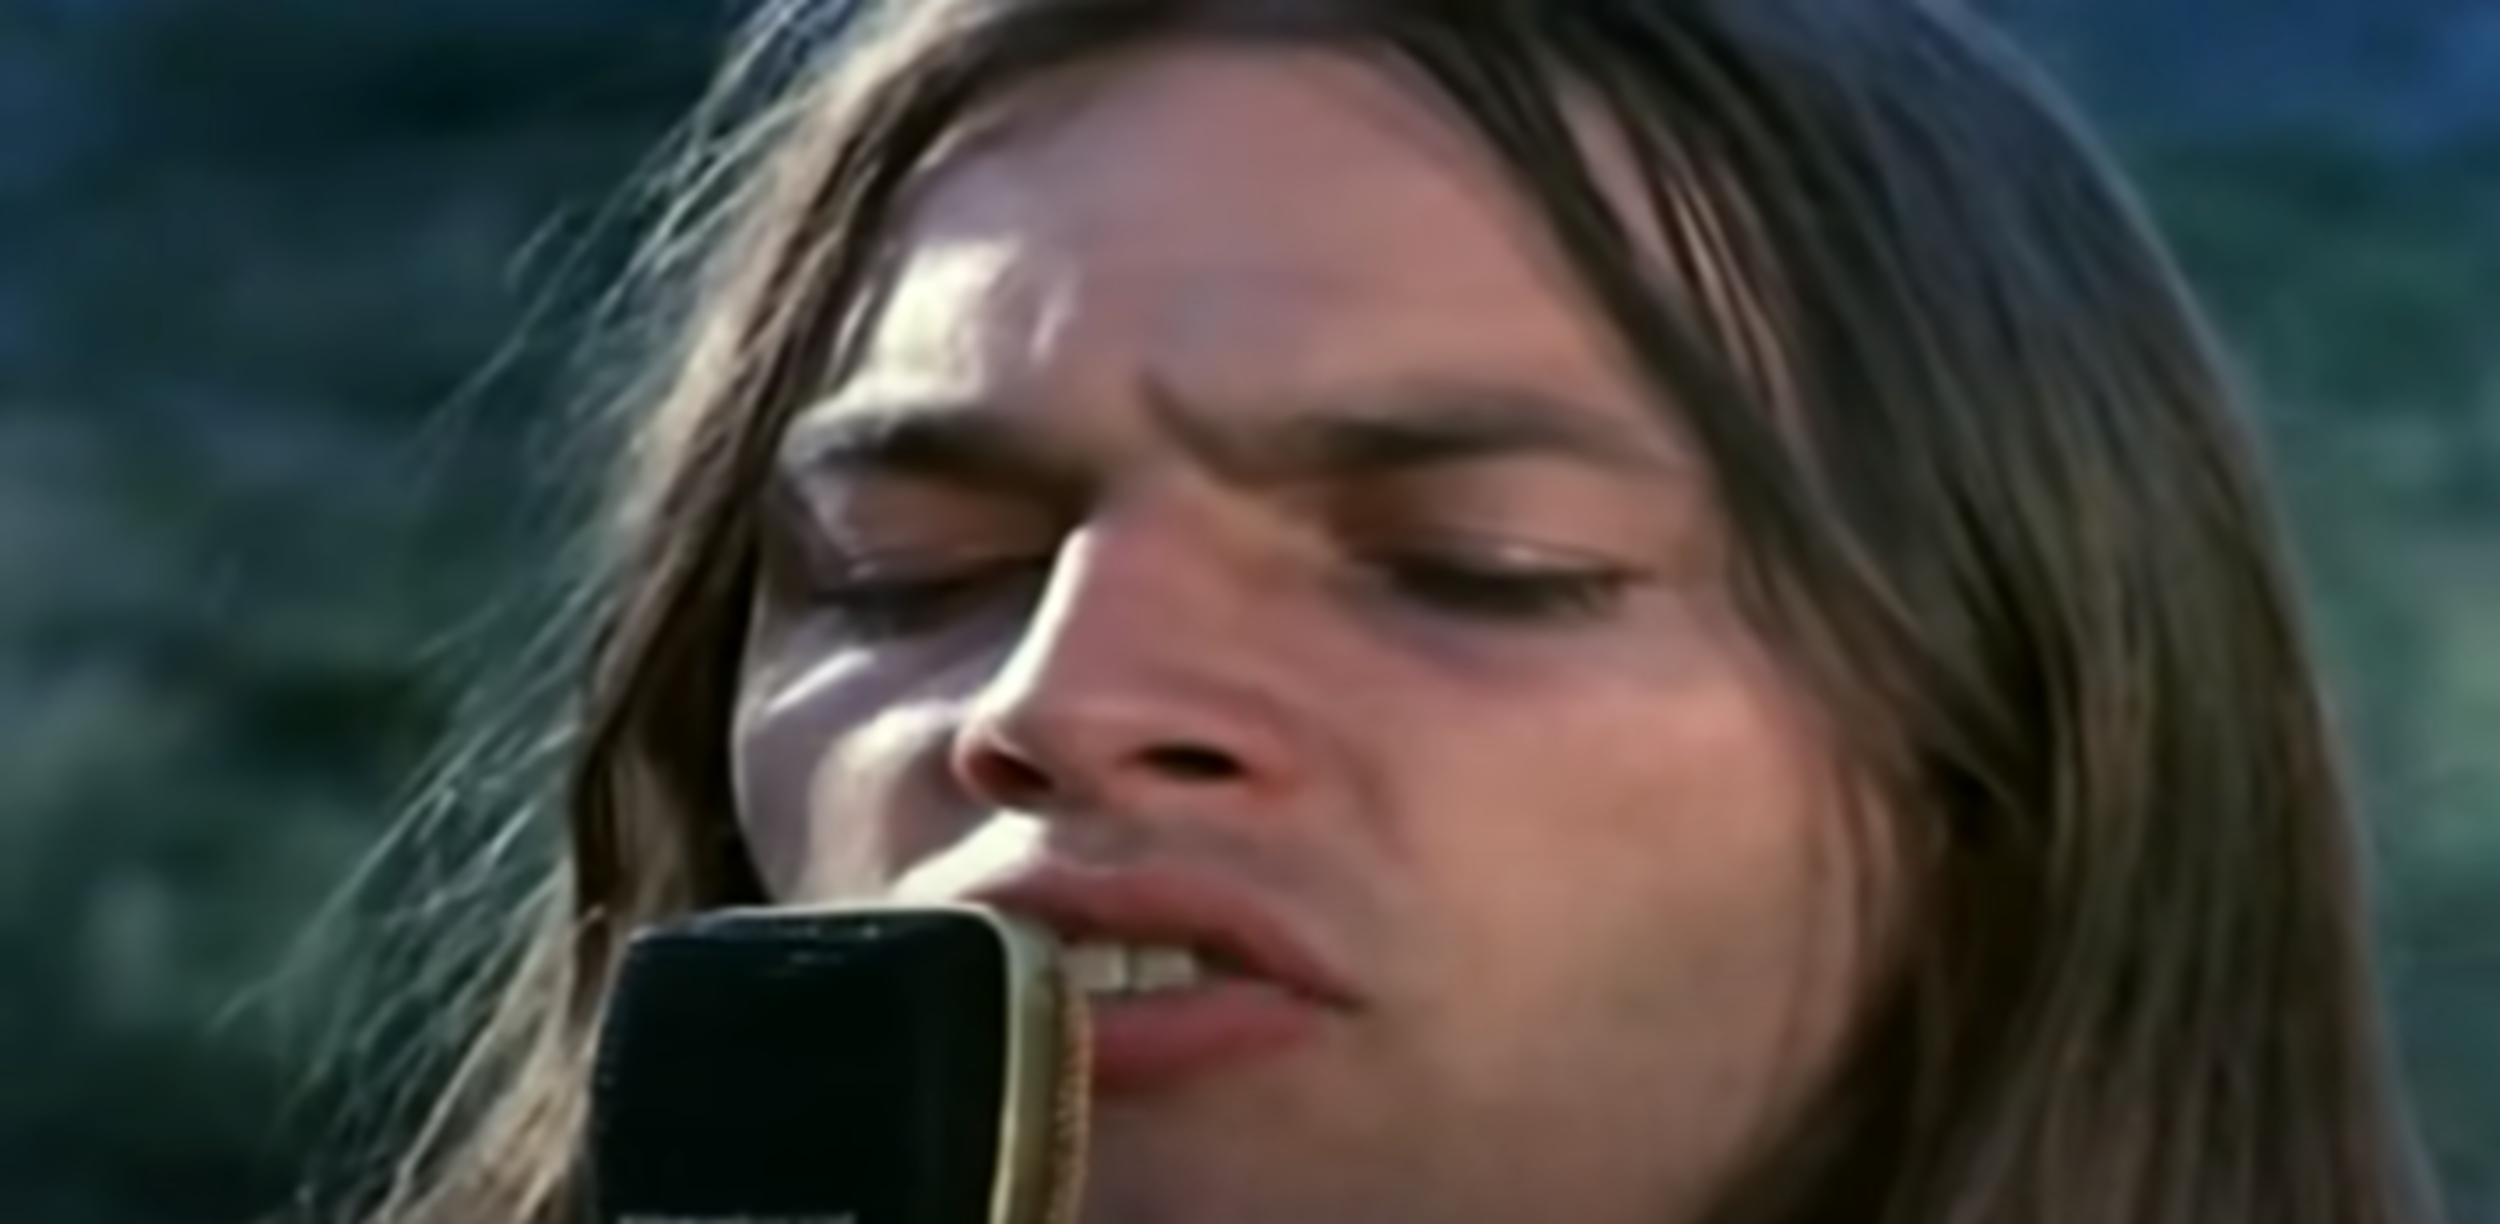 <p>When David Gilmour joined Pink Floyd in late 1967, it was to bring some stability to the group because Syd Barrett was becoming more unreliable on and off stage. However, Gilmour brought so much more as a guitar player and a songwriter. His polished, mature, melodic approach to songwriting turned the Floyd from a <a href="https://www.youtube.com/watch?v=pJh9OLlXenM">quality semi-psychedelic, progressive rock act </a>of the late 1960s into a commercial musical juggernaut. <em>Meddle </em>is the true coming-out party for Gilmour, even though he'd been with the band for a while. He had a hand in the overall creation and execution of major Floyd hits like "Echoes," "Time," "Wish You Were Here," and <a href="https://www.youtube.com/watch?v=_FrOQC-zEog">"Comfortably Numb."</a></p><p>You may also like: <a href='https://www.yardbarker.com/entertainment/articles/15_essential_queen_live_performances/s1__38717633'>15 essential Queen live performances</a></p>